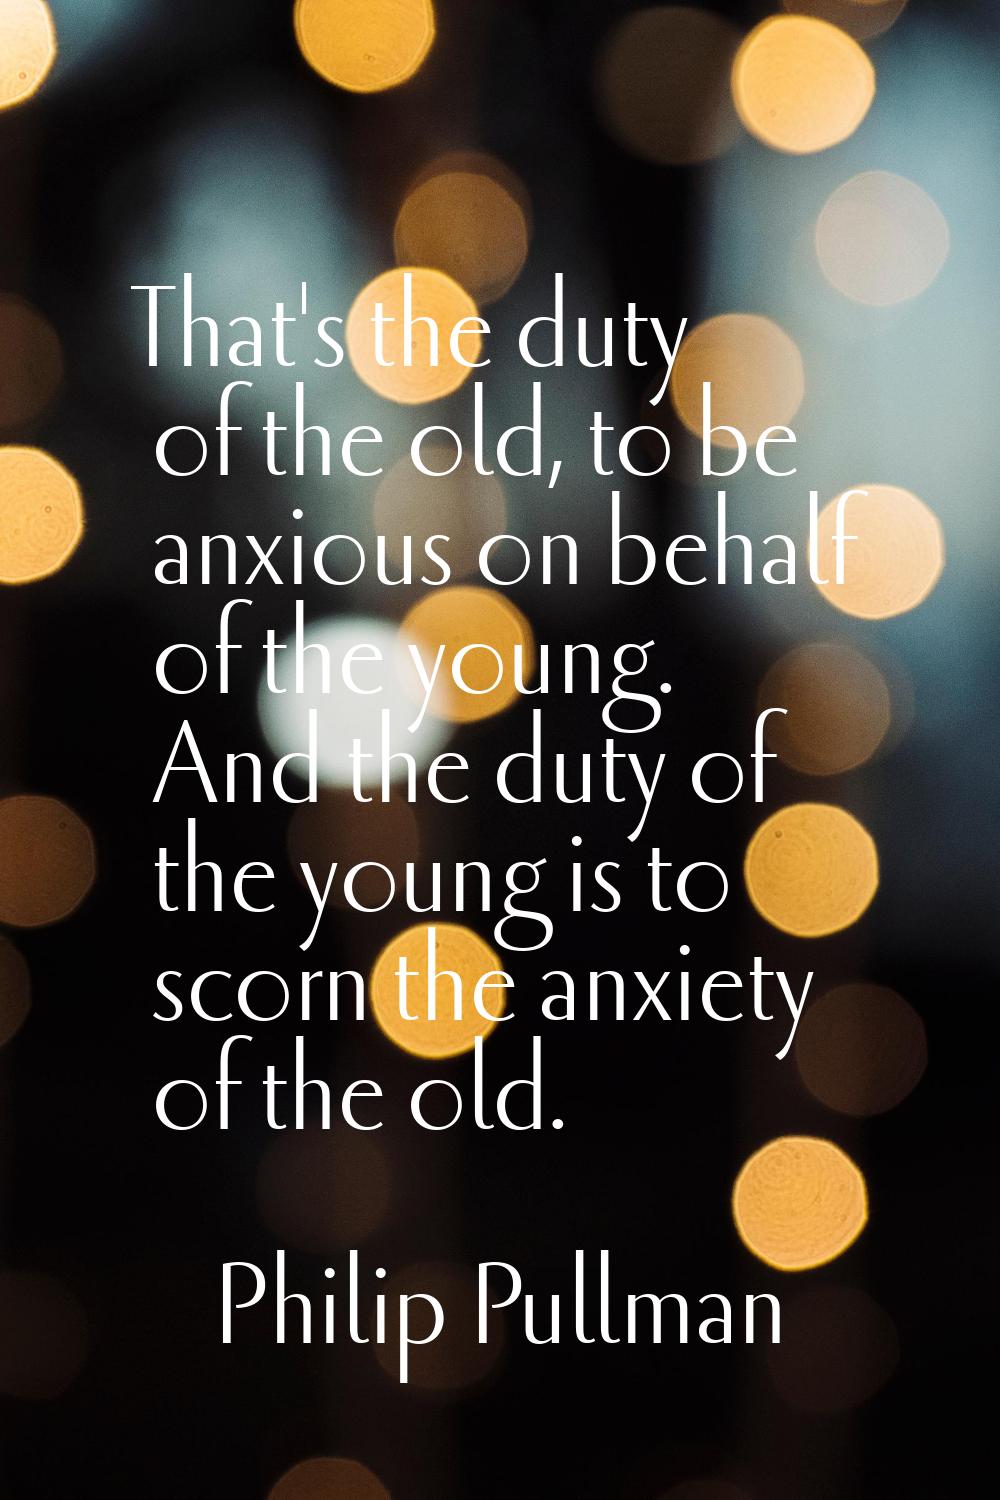 That's the duty of the old, to be anxious on behalf of the young. And the duty of the young is to s